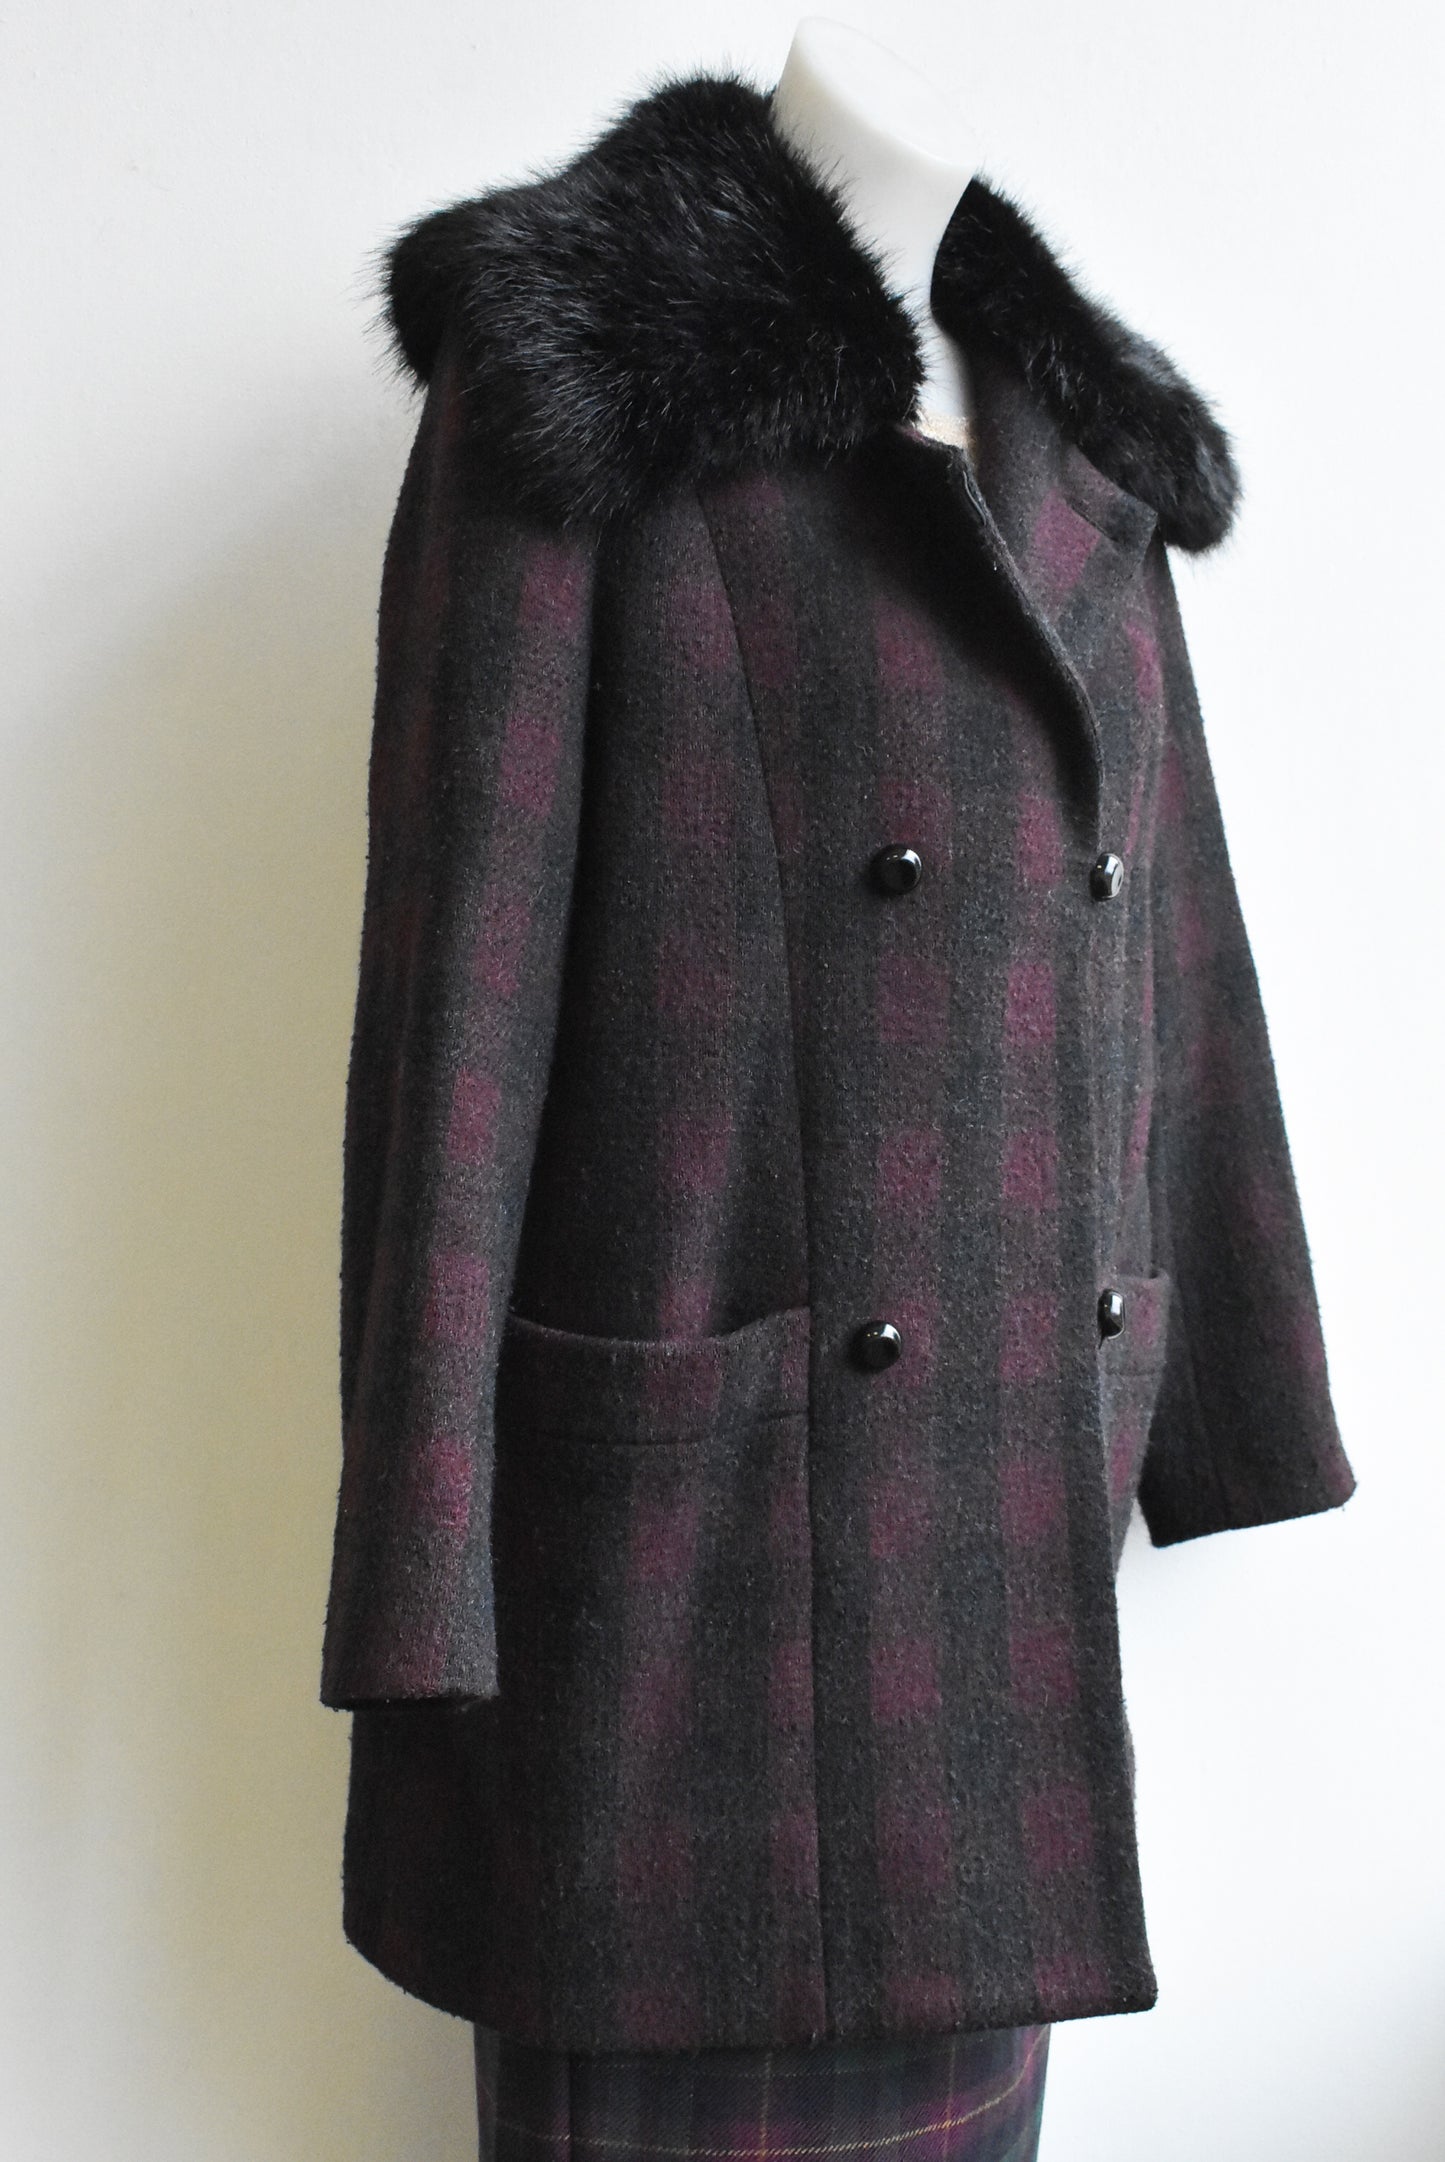 French Connection wool blend coat with furry collar, 8